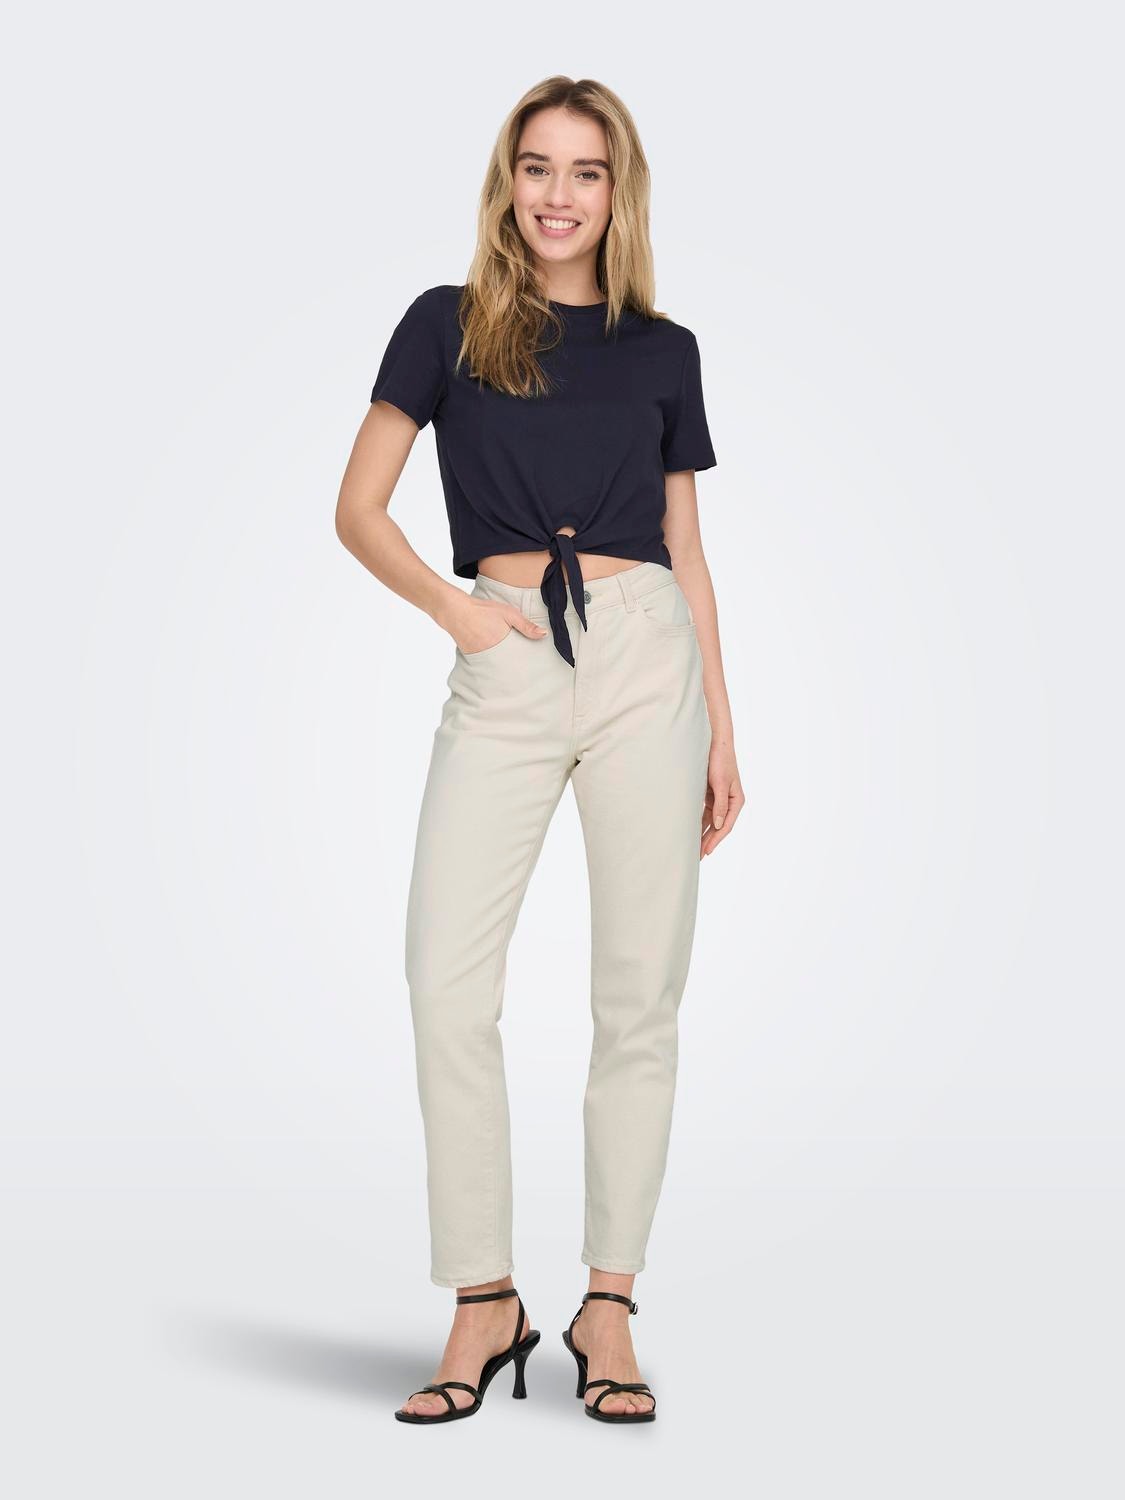 ONLY Straight Fit High waist Jeans -Ecru - 15292435